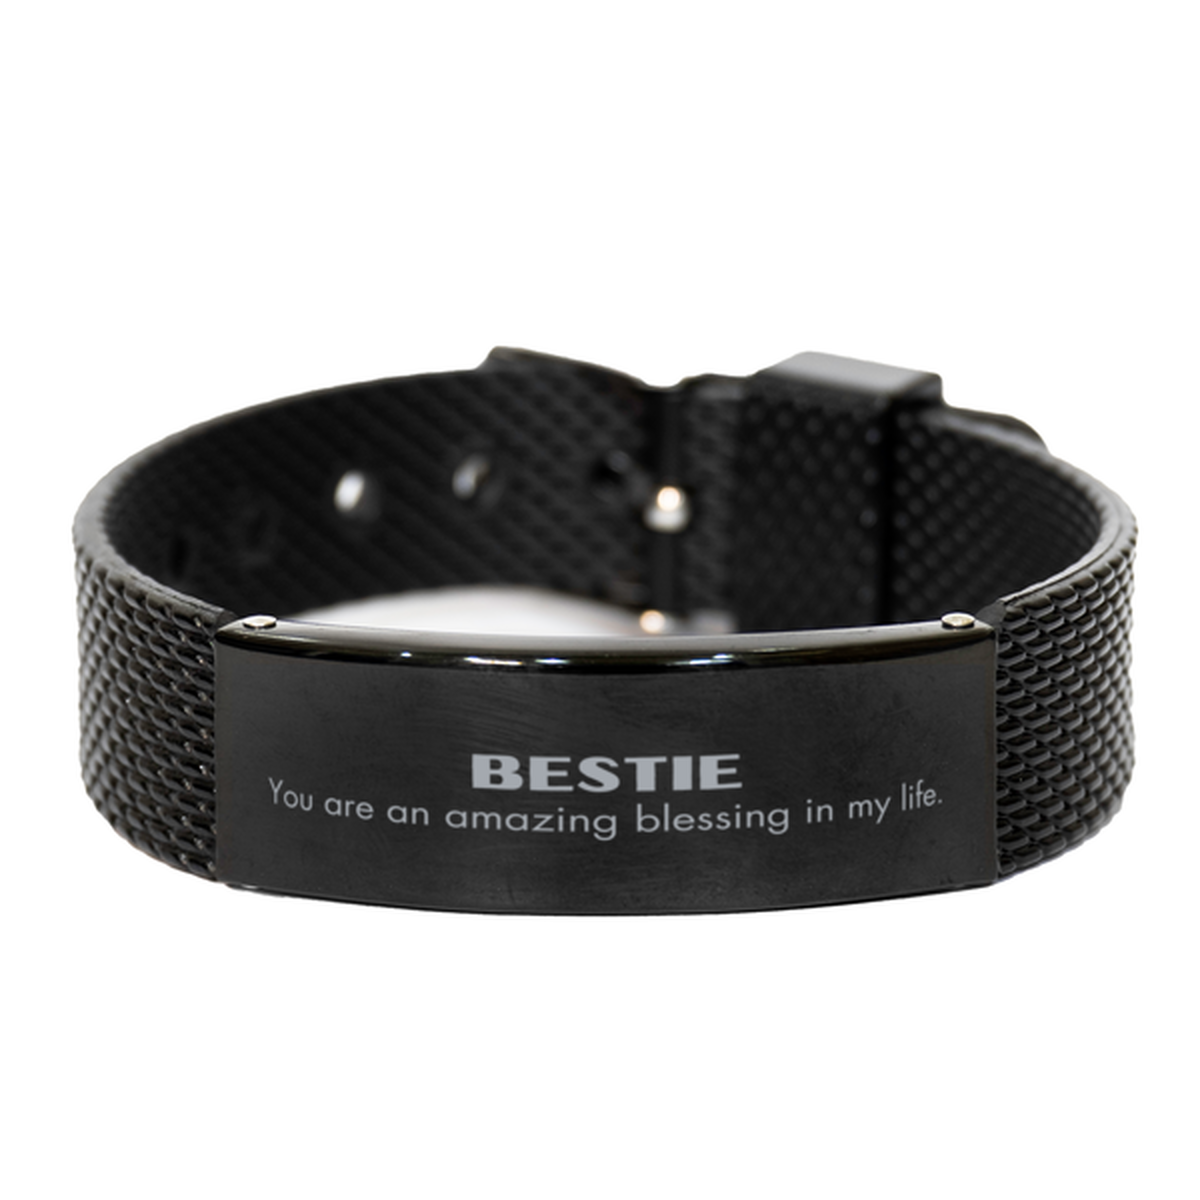 Bestie Black Shark Mesh Bracelet, You are an amazing blessing in my life, Thank You Gifts For Bestie, Inspirational Birthday Christmas Unique Gifts For Bestie